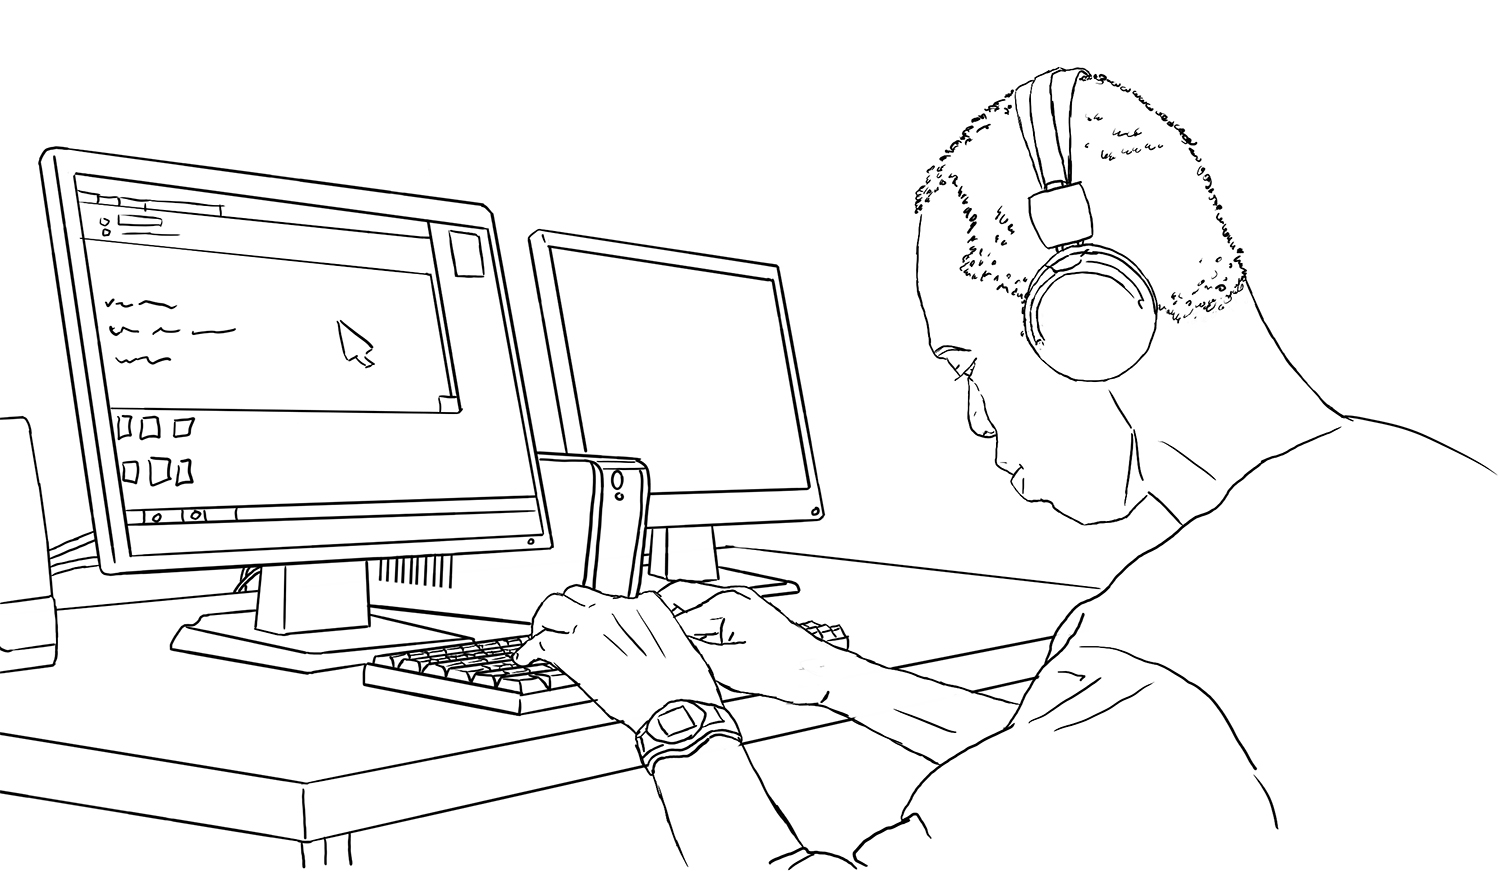 A blind person with headphones looking downward, using a desktop computer and a keyboard.